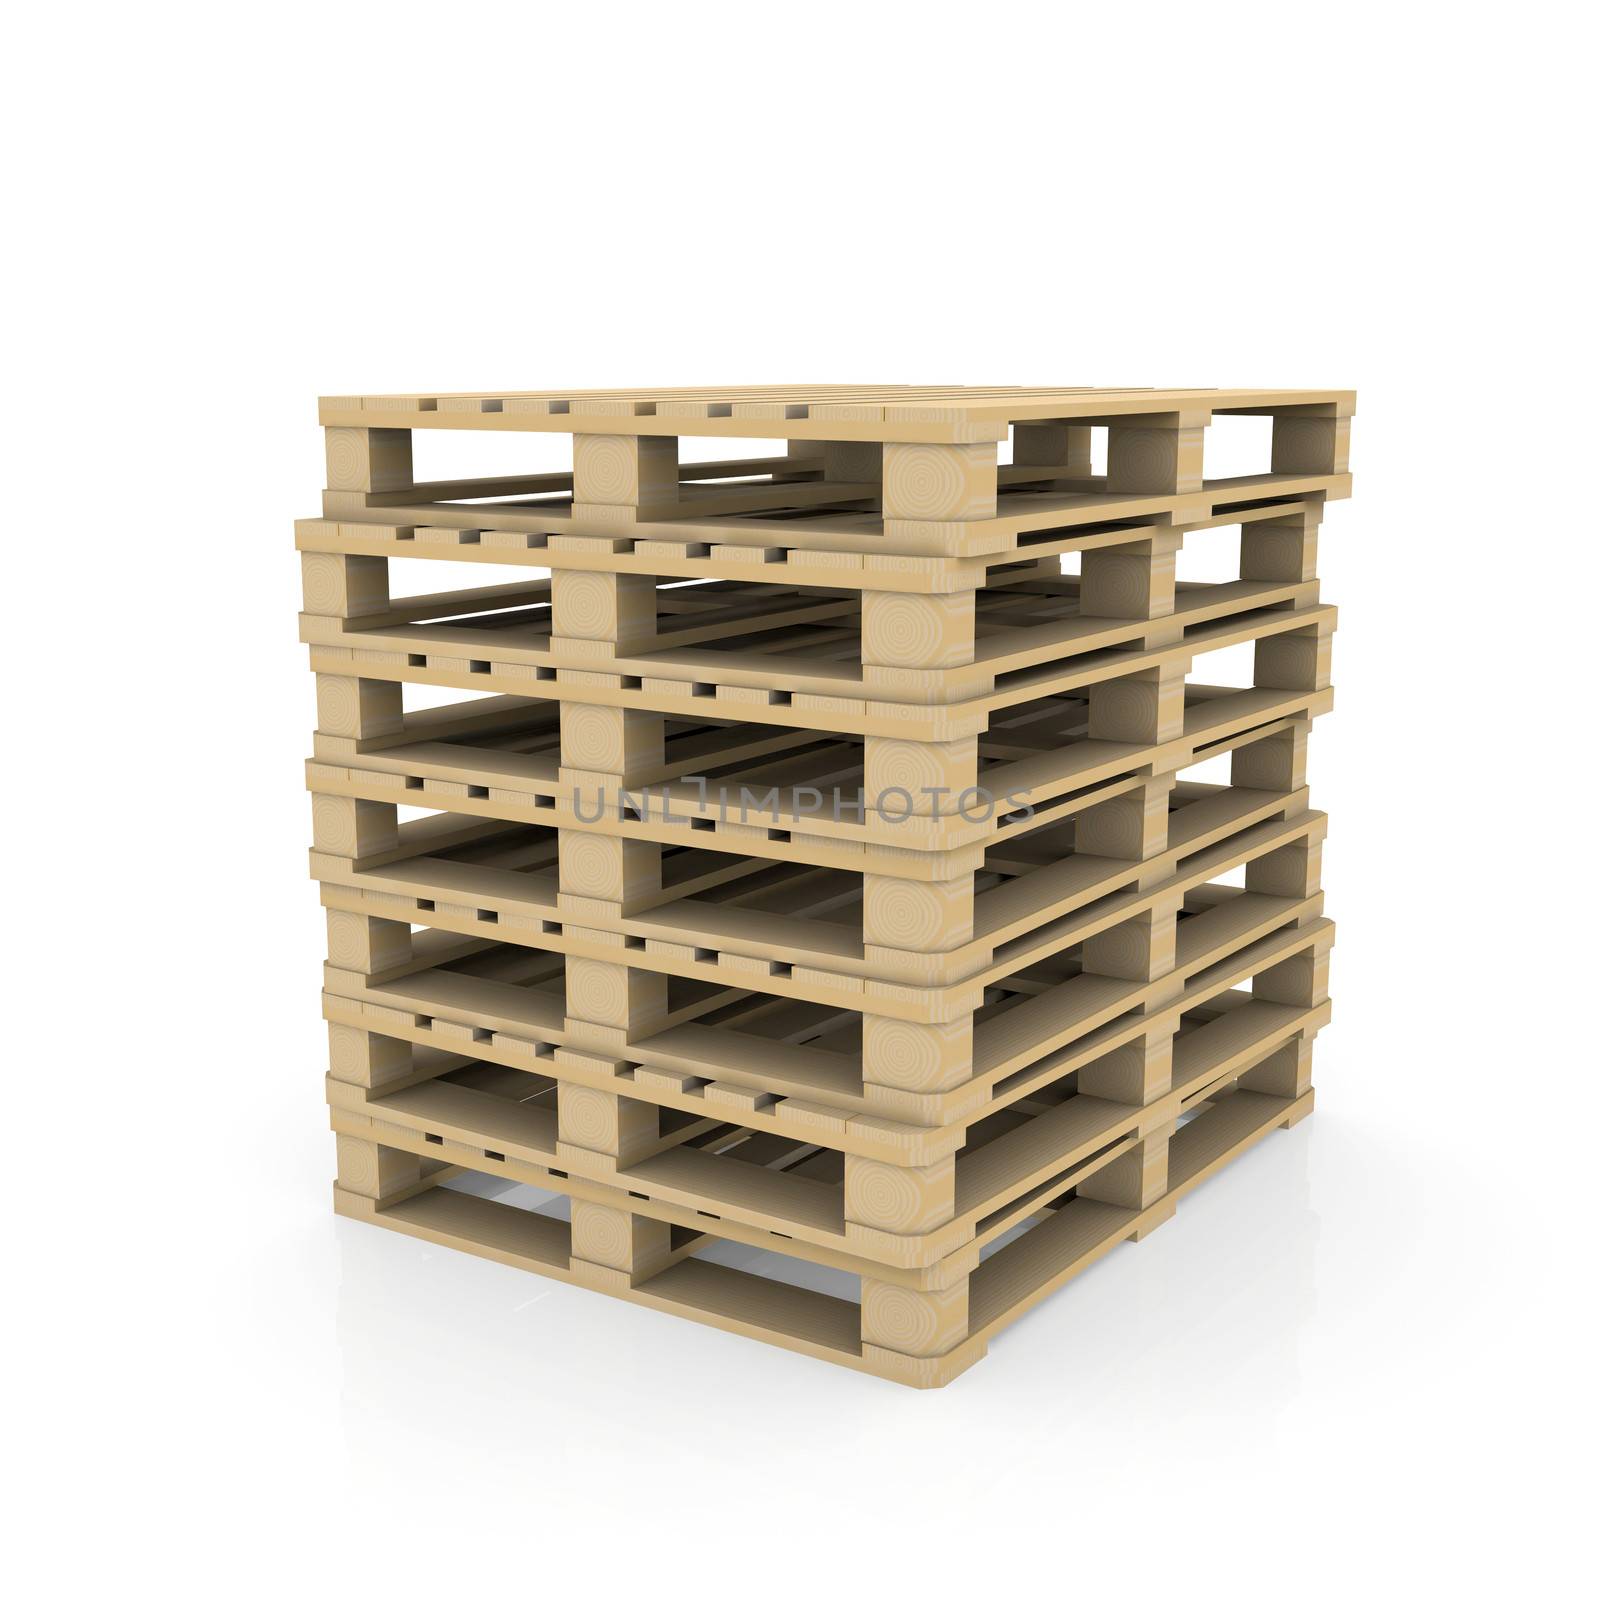 Group wooden pallets. Isolated render on a white background